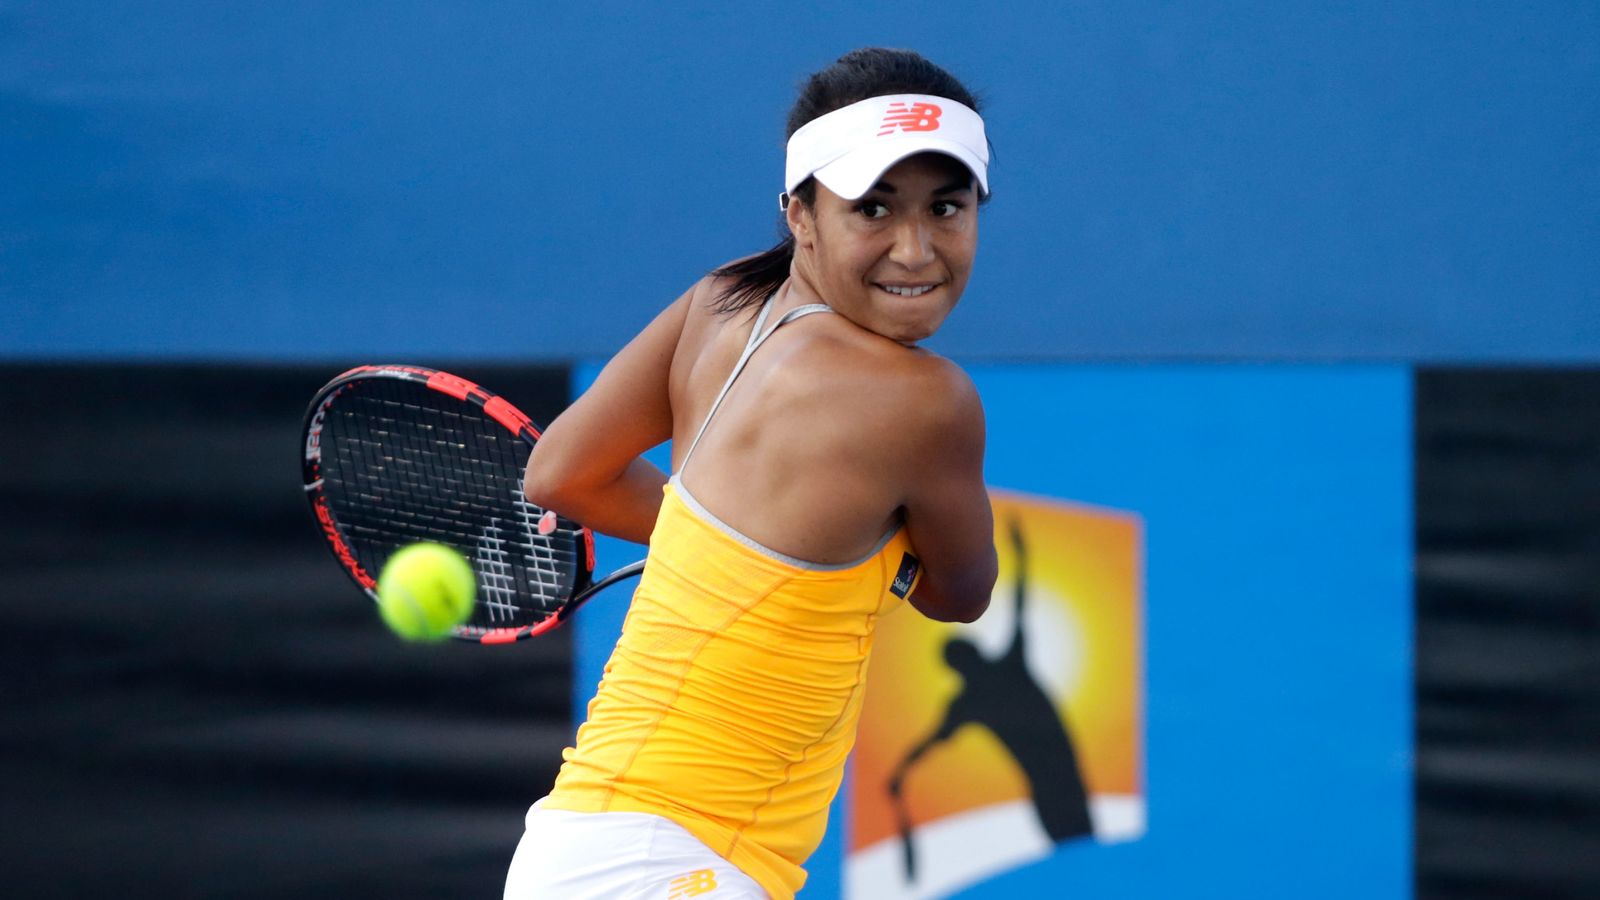 Heather Watson suffers first round defeat against Timea Babos at Australian Open Tennis News Sky Sports